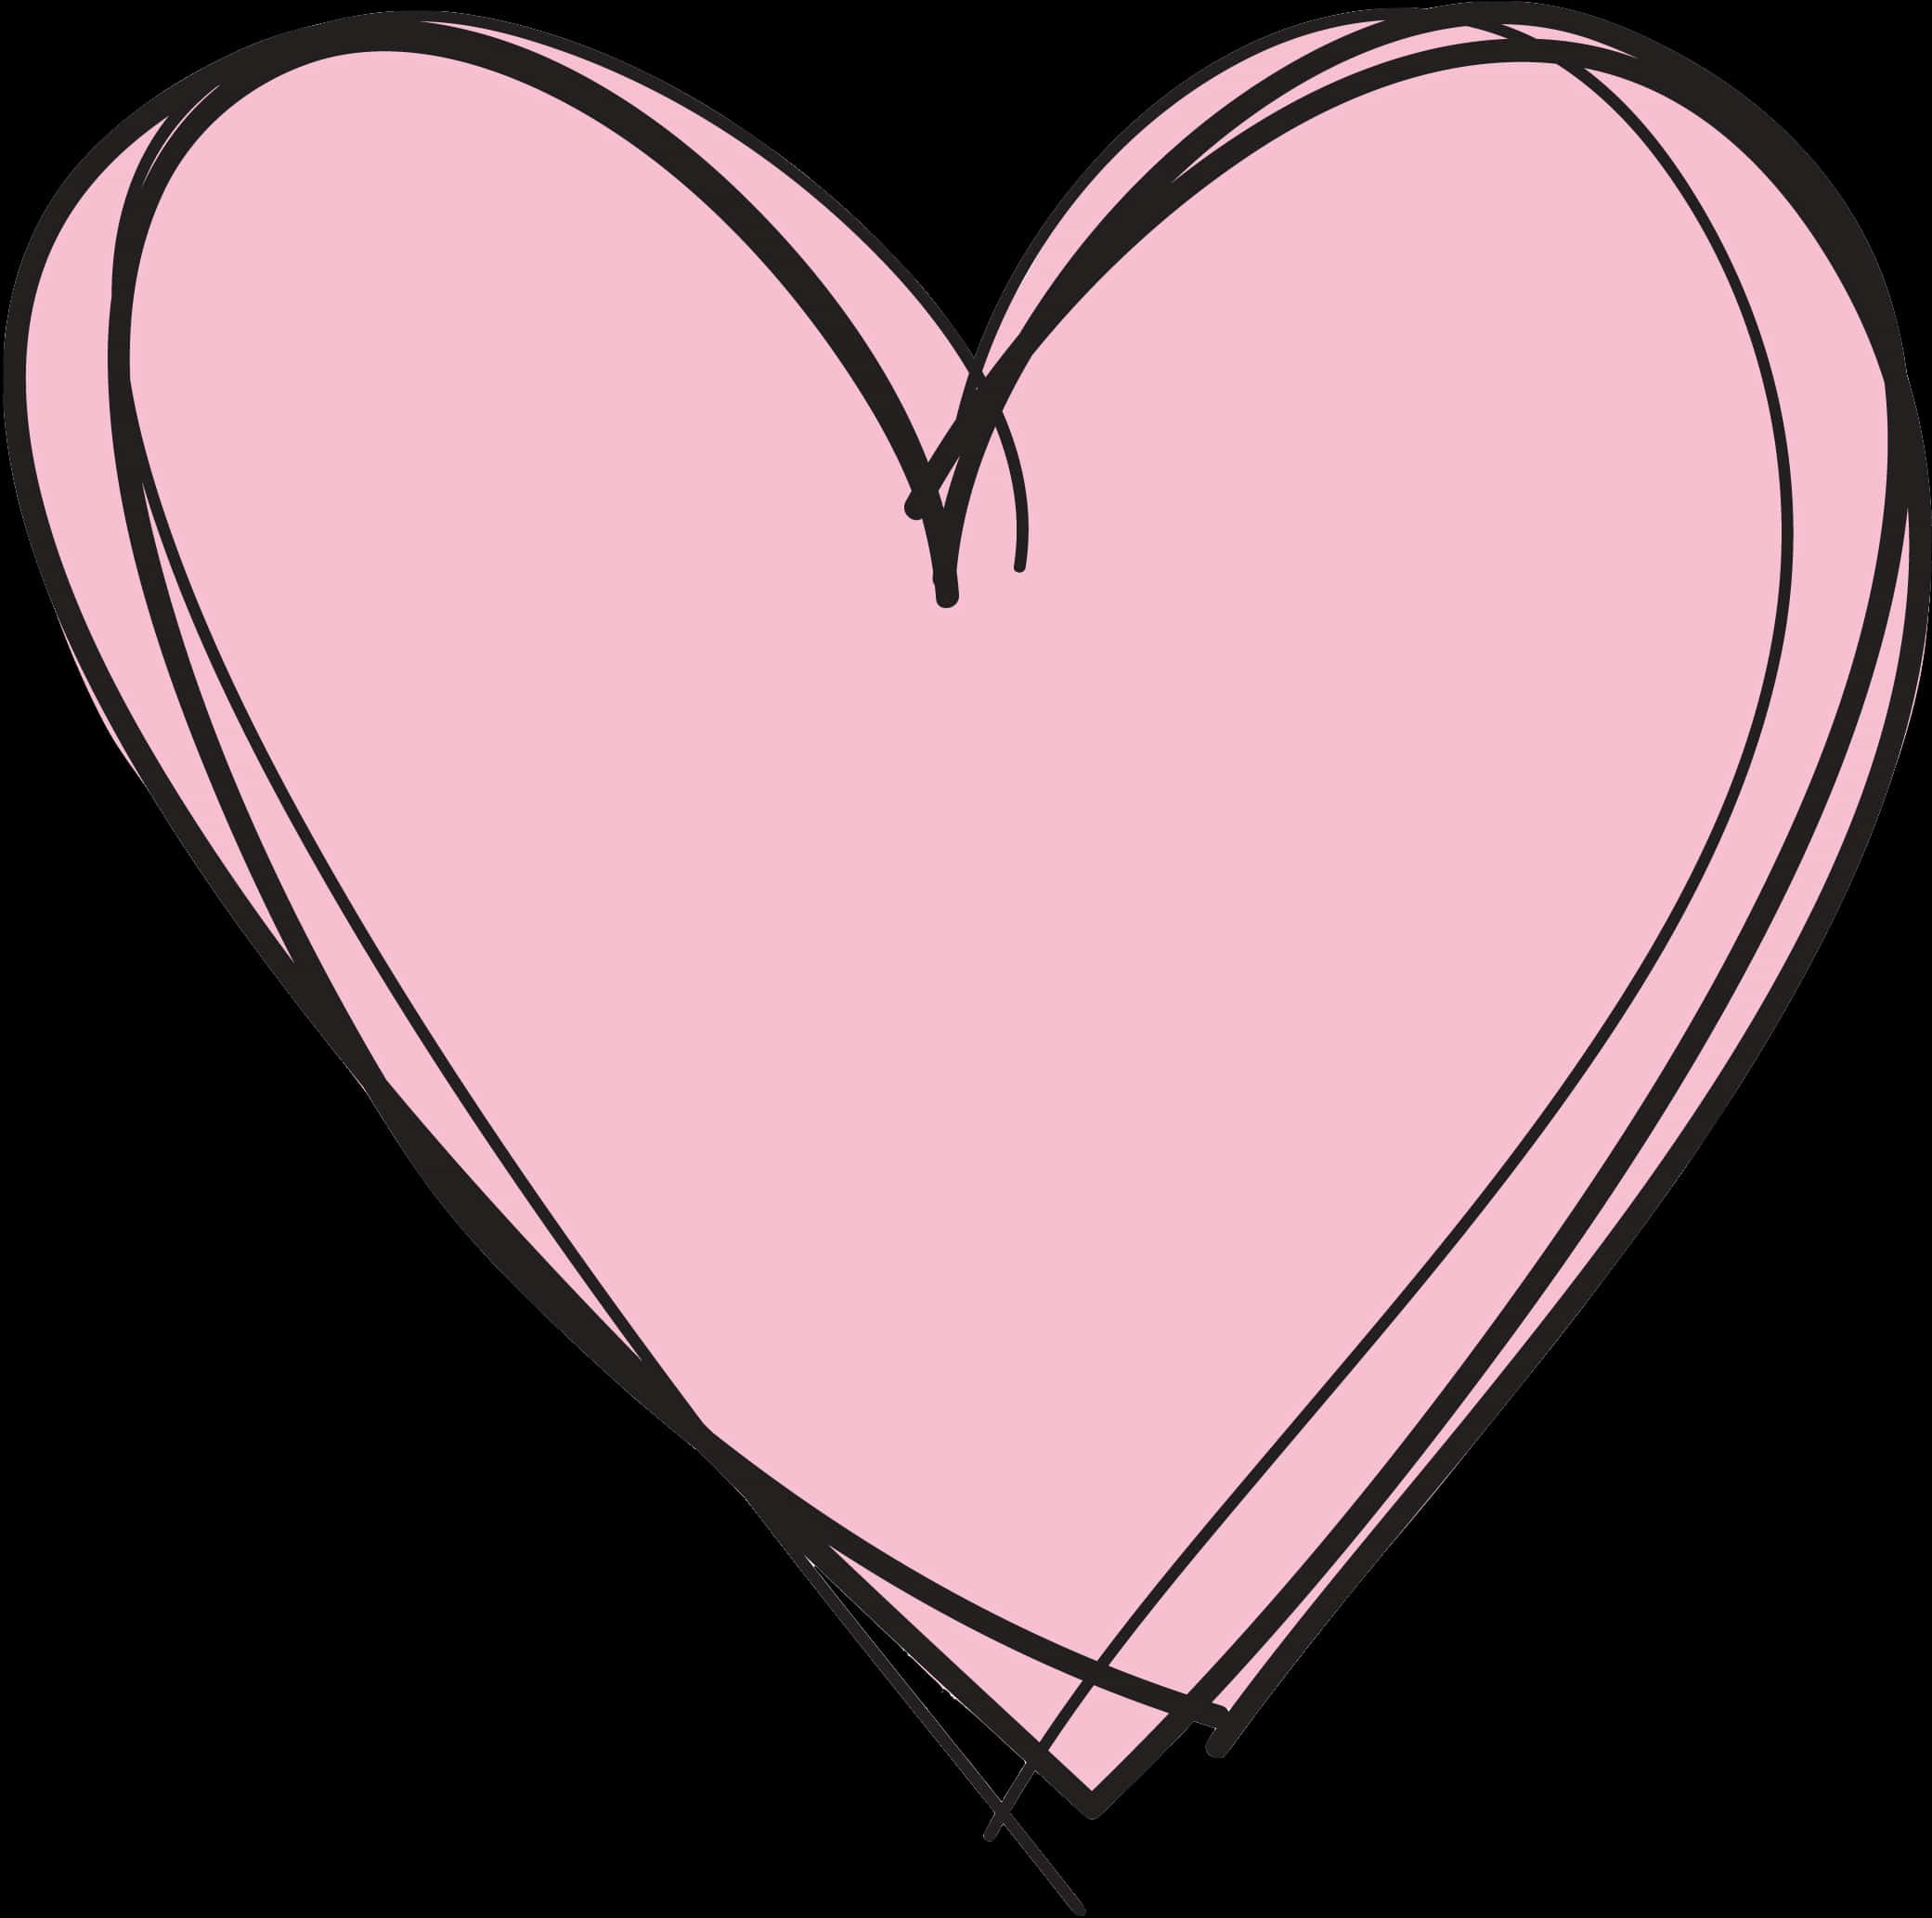 A Pink Heart With Black Lines